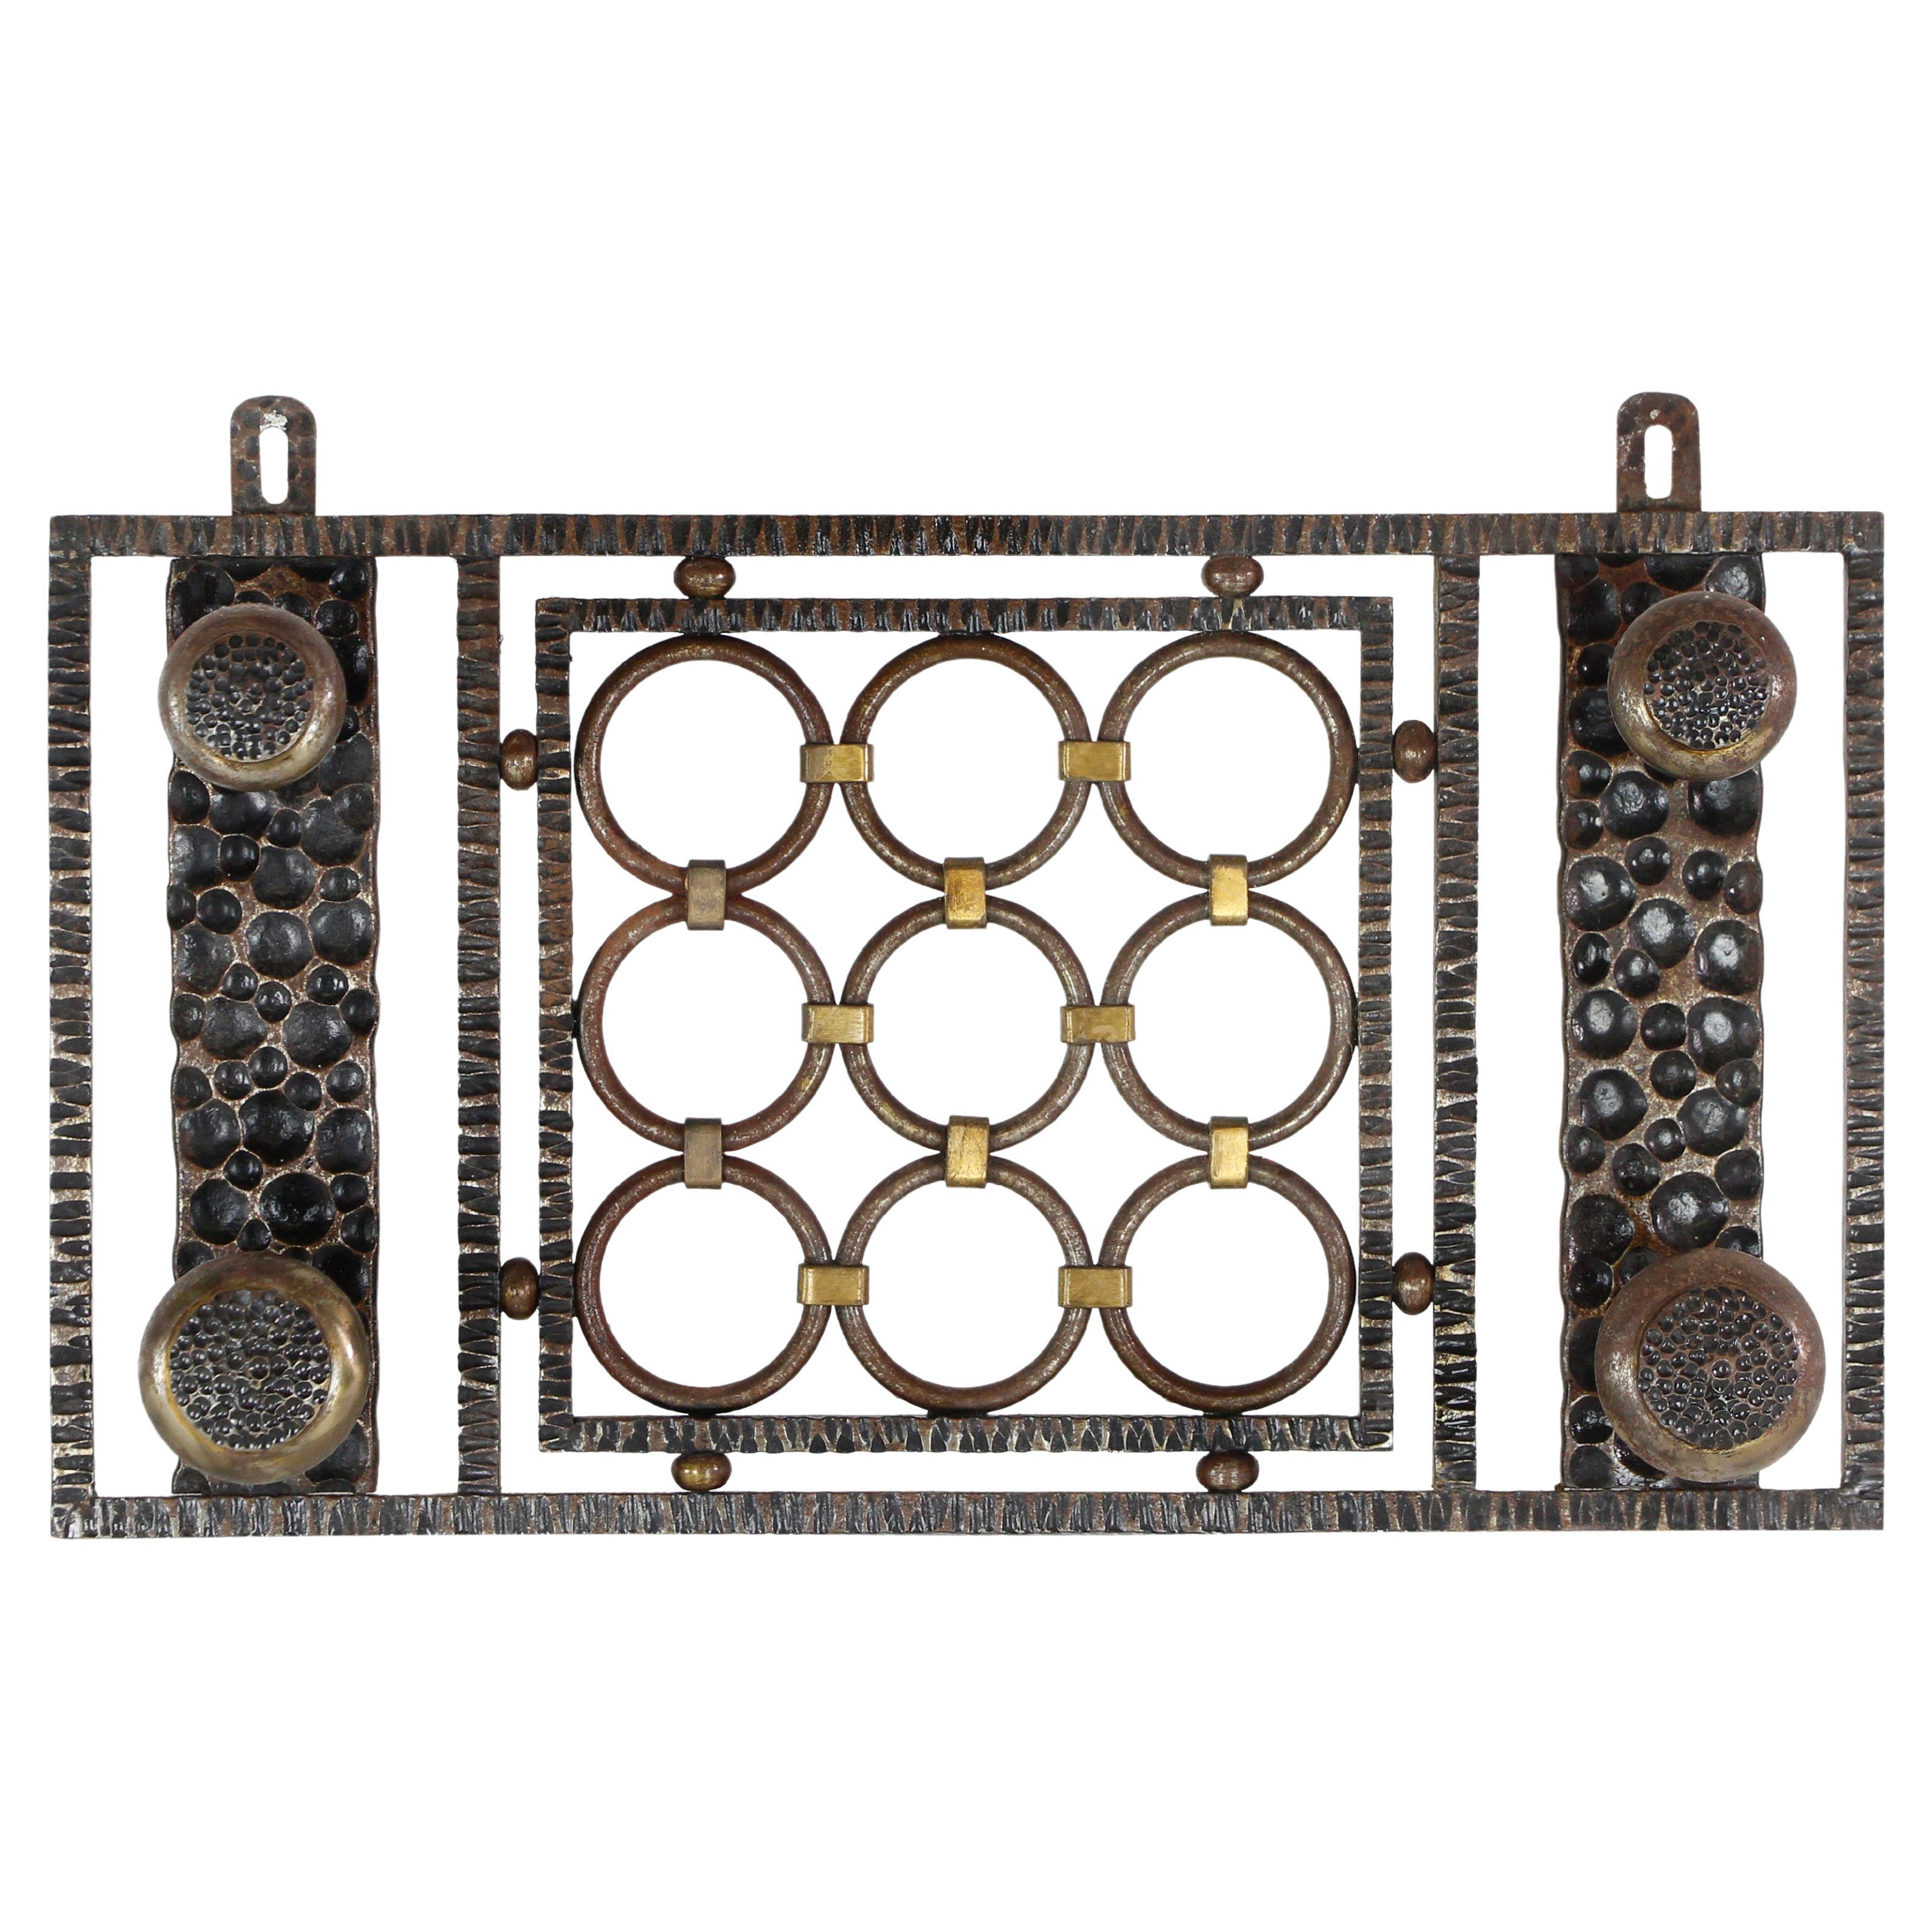 European Wrought Iron Ornate 4 Round Hook Wall Rack Unit For Sale